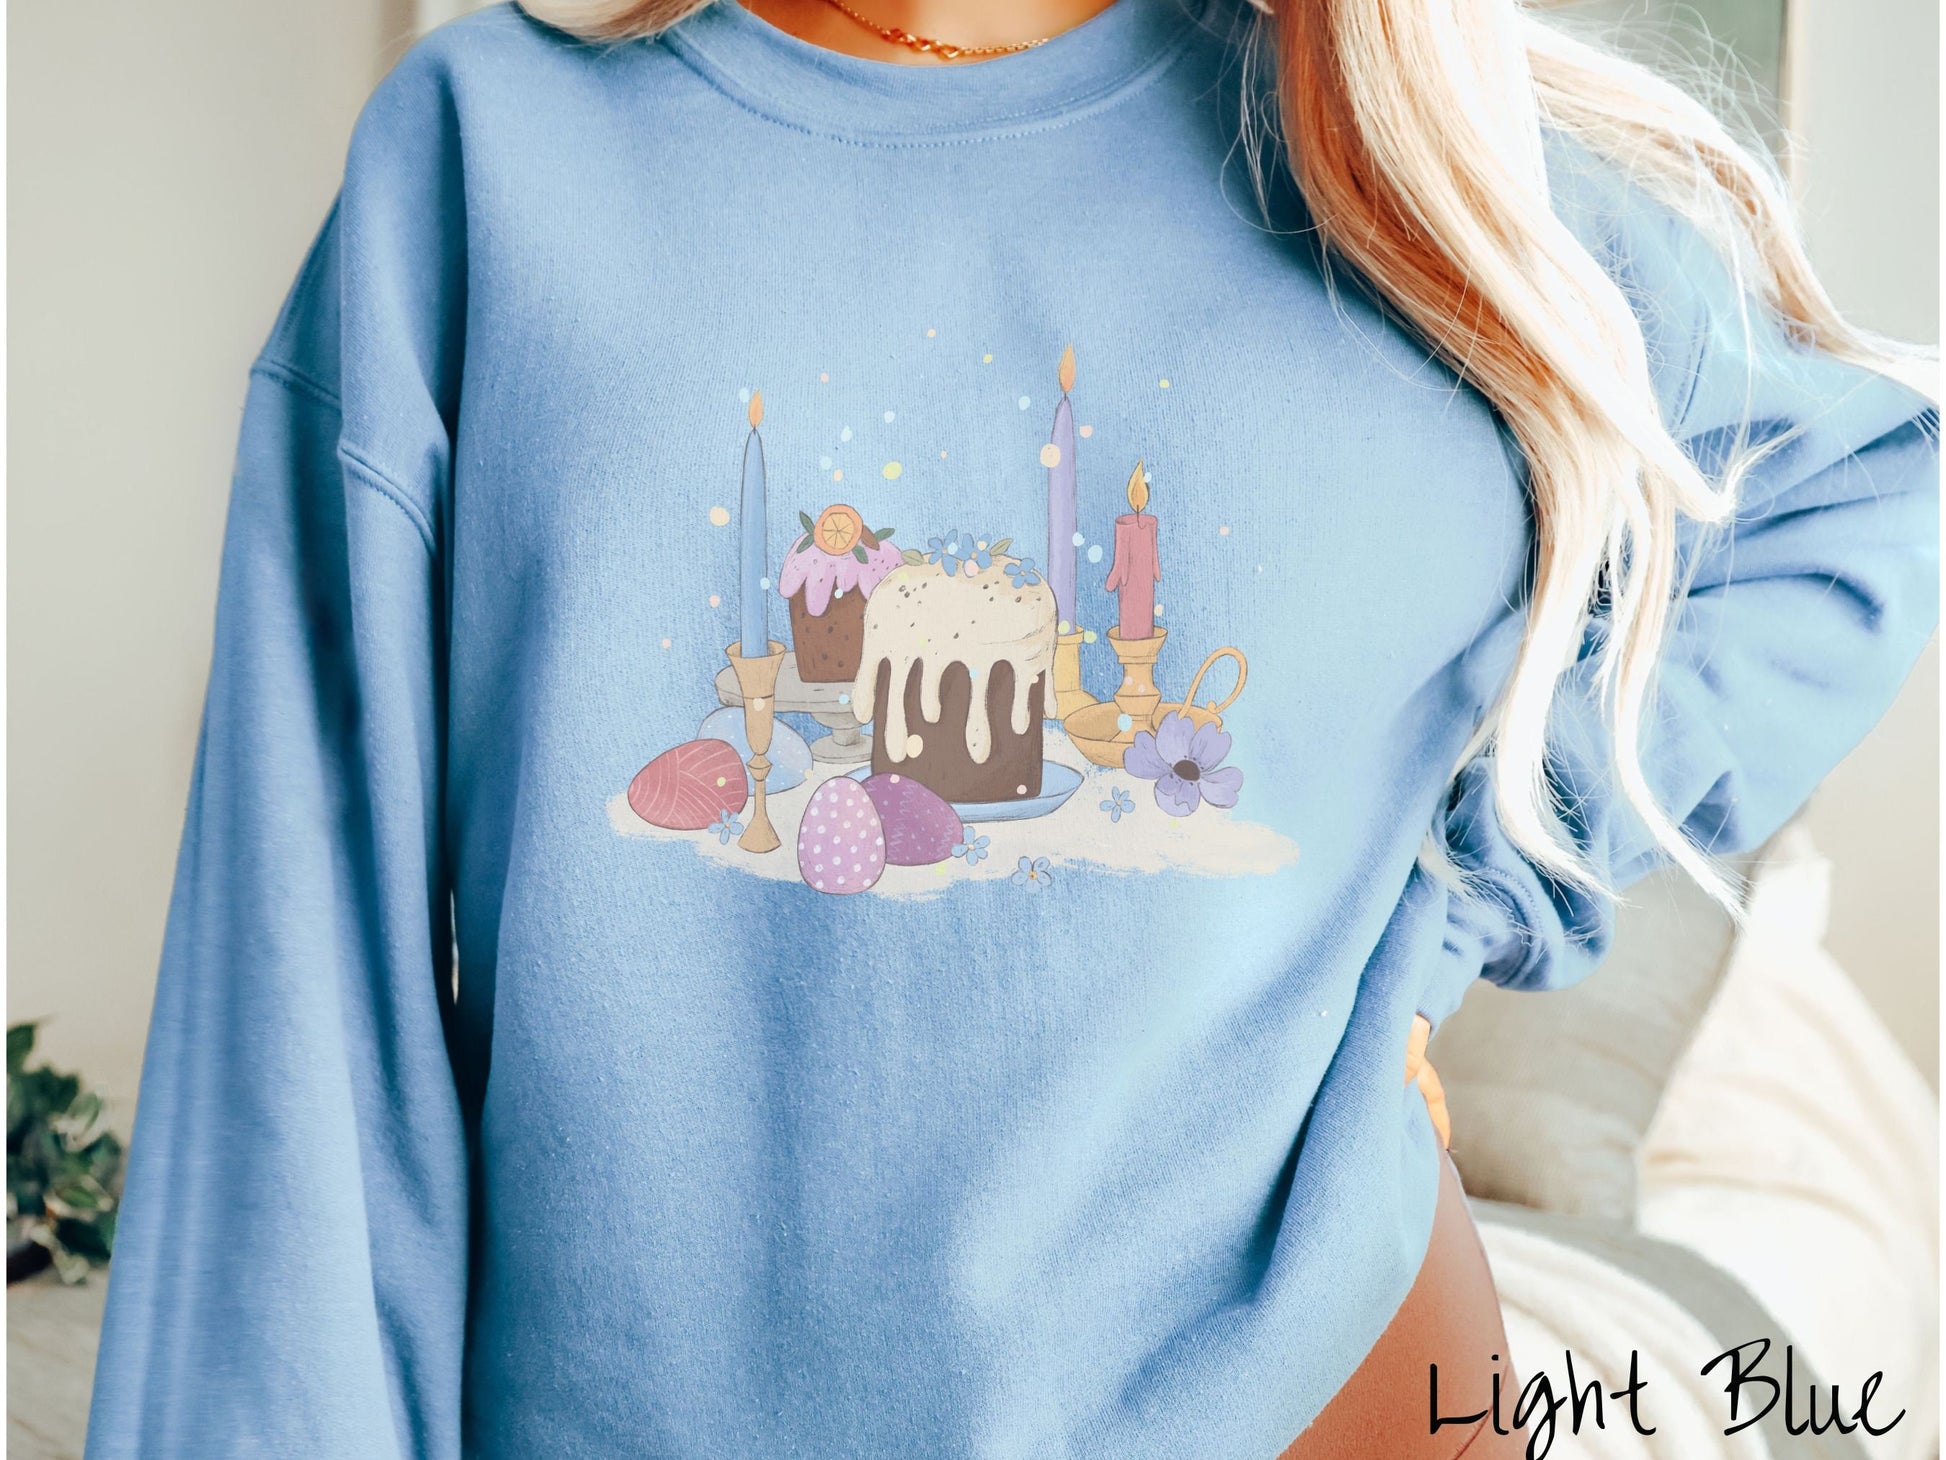 A woman wearing a cute, vintage light blue colored sweatshirt with an assortment of colorful candles with wax running down the sides in the center, scattered around the candles are pink, purple, red, and blue colored Easter eggs.